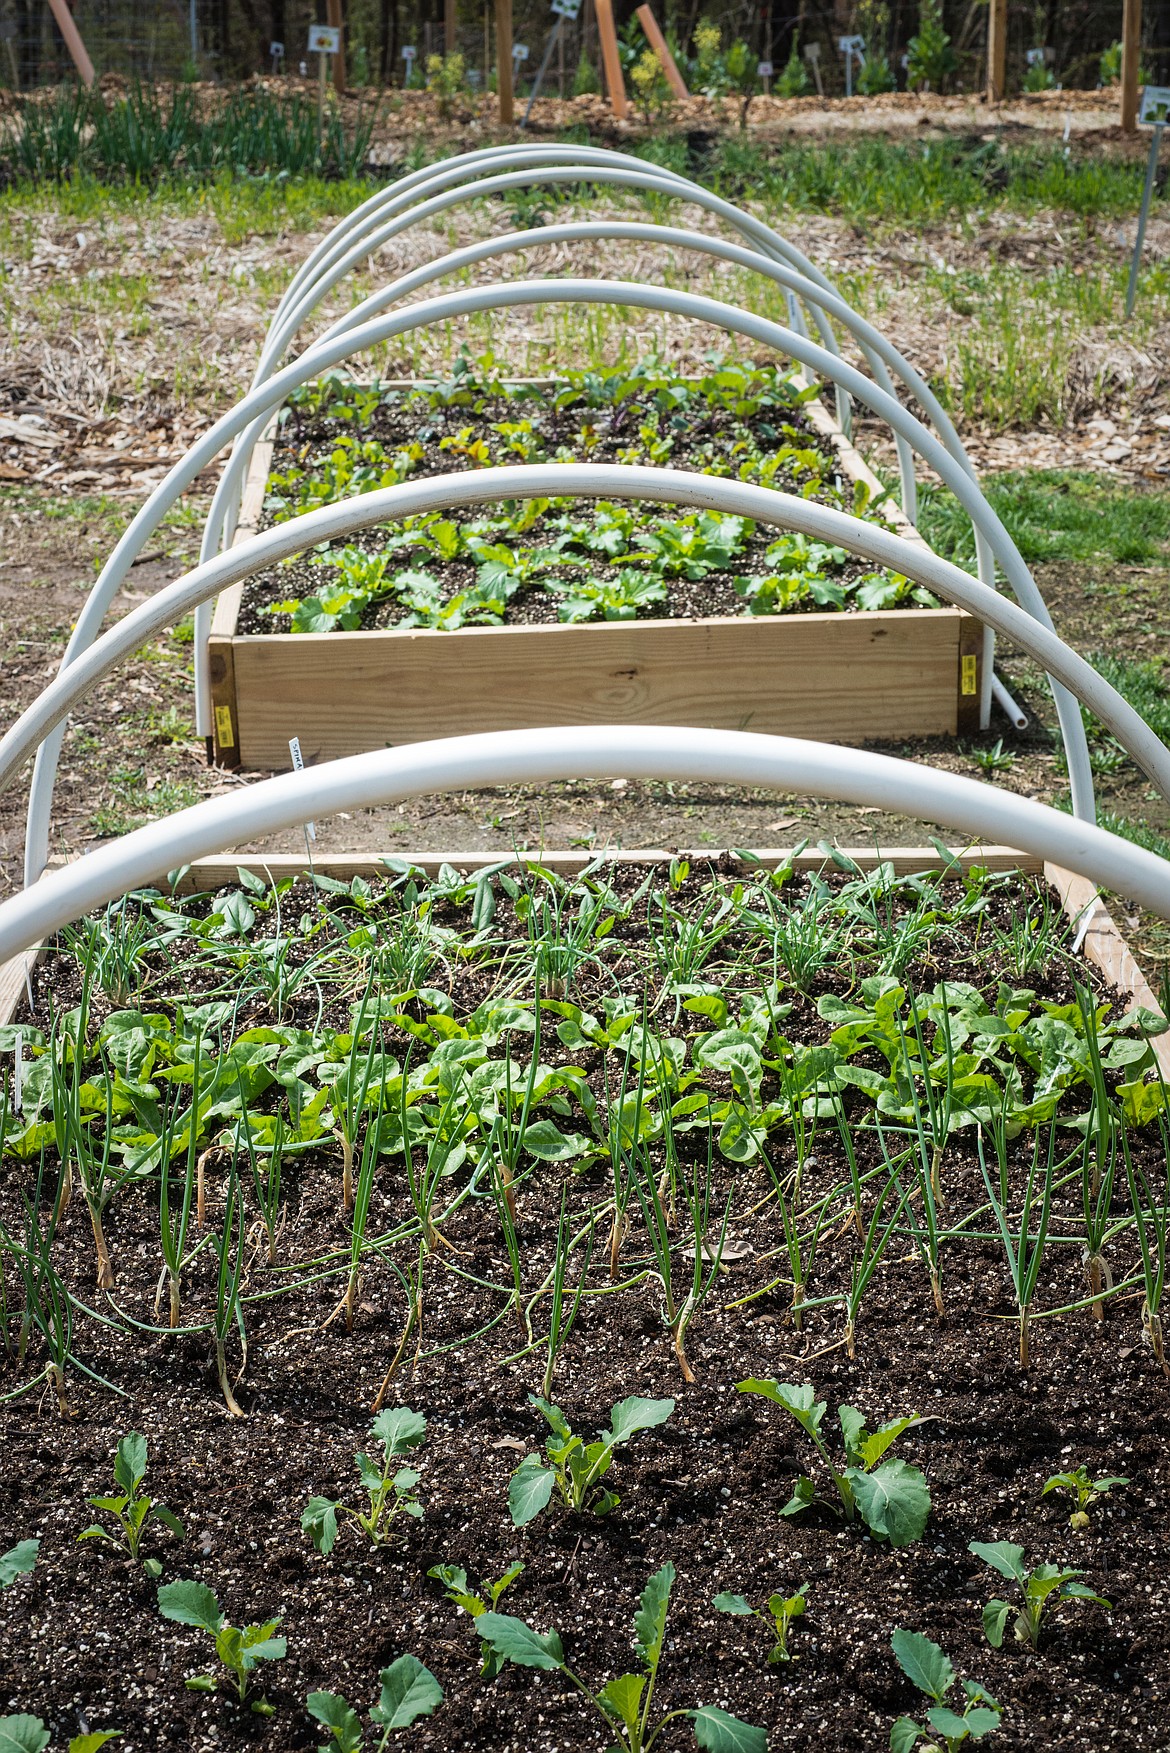 A hoop house, made with plastic draped over a frame like this, is a good way to keep early garden starts warm outside until the first frost has passed.